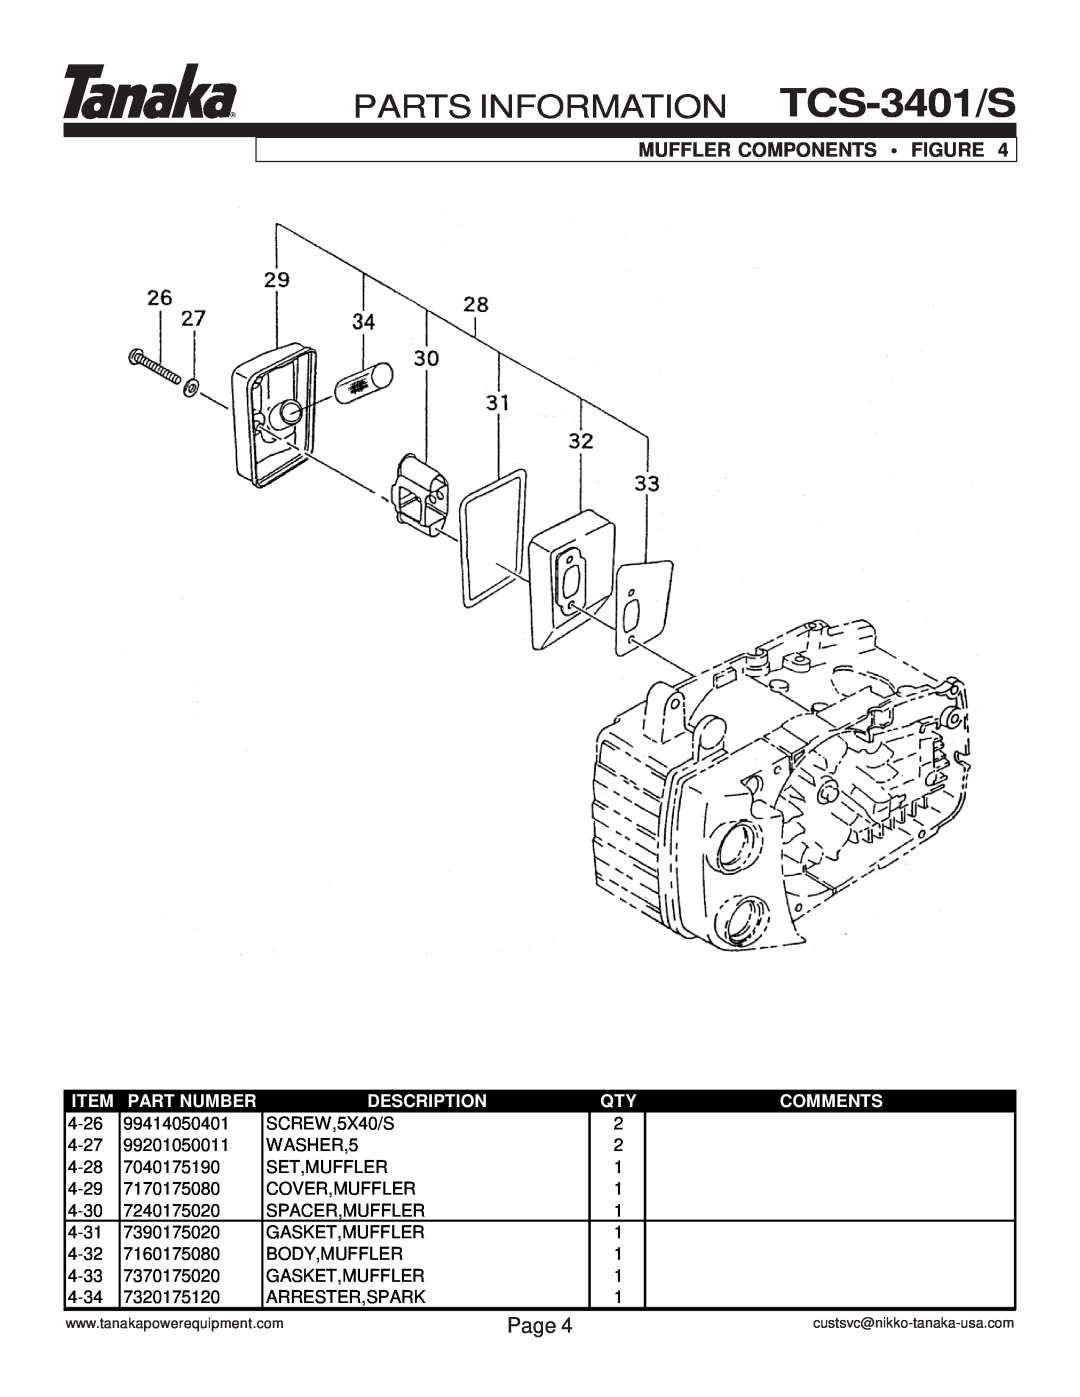 Tanaka manual Muffler Components Figure, PARTS INFORMATION TCS-3401/S, Page, Part Number, Description, Comments 